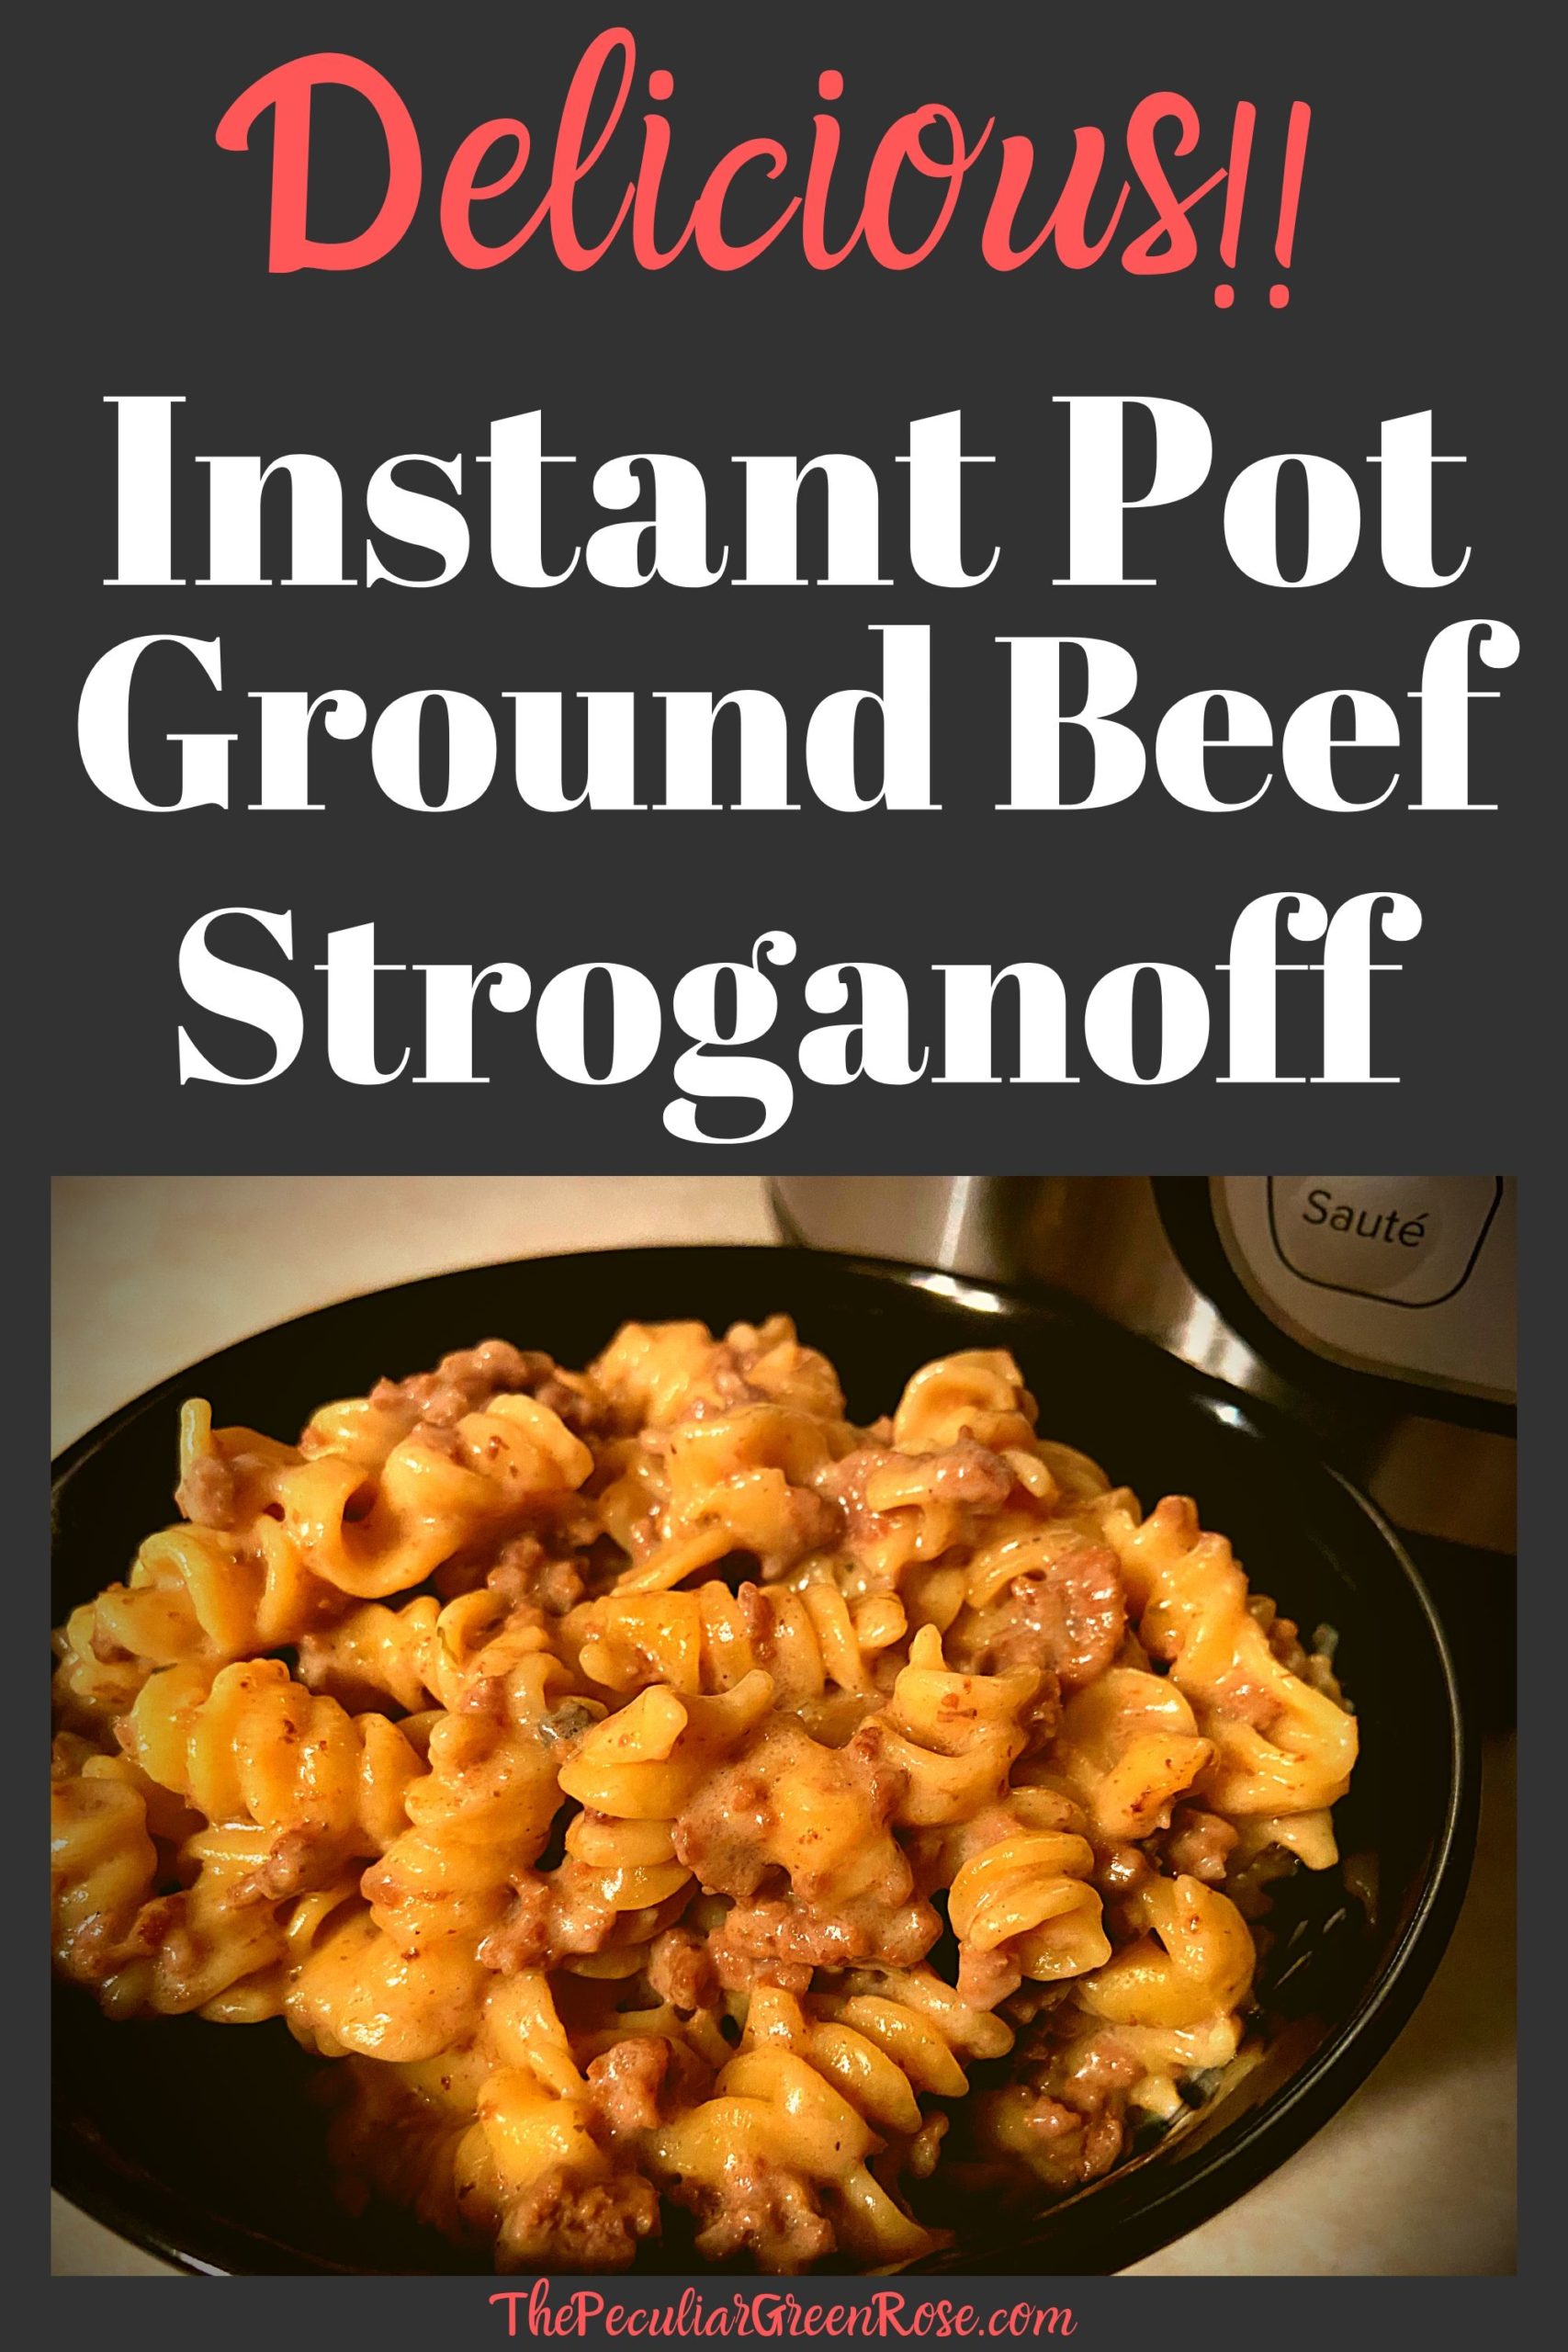 A black bowl filled with instant pot ground beef stroganoff sitting on a kitchen counter in front of an Instant Pot.